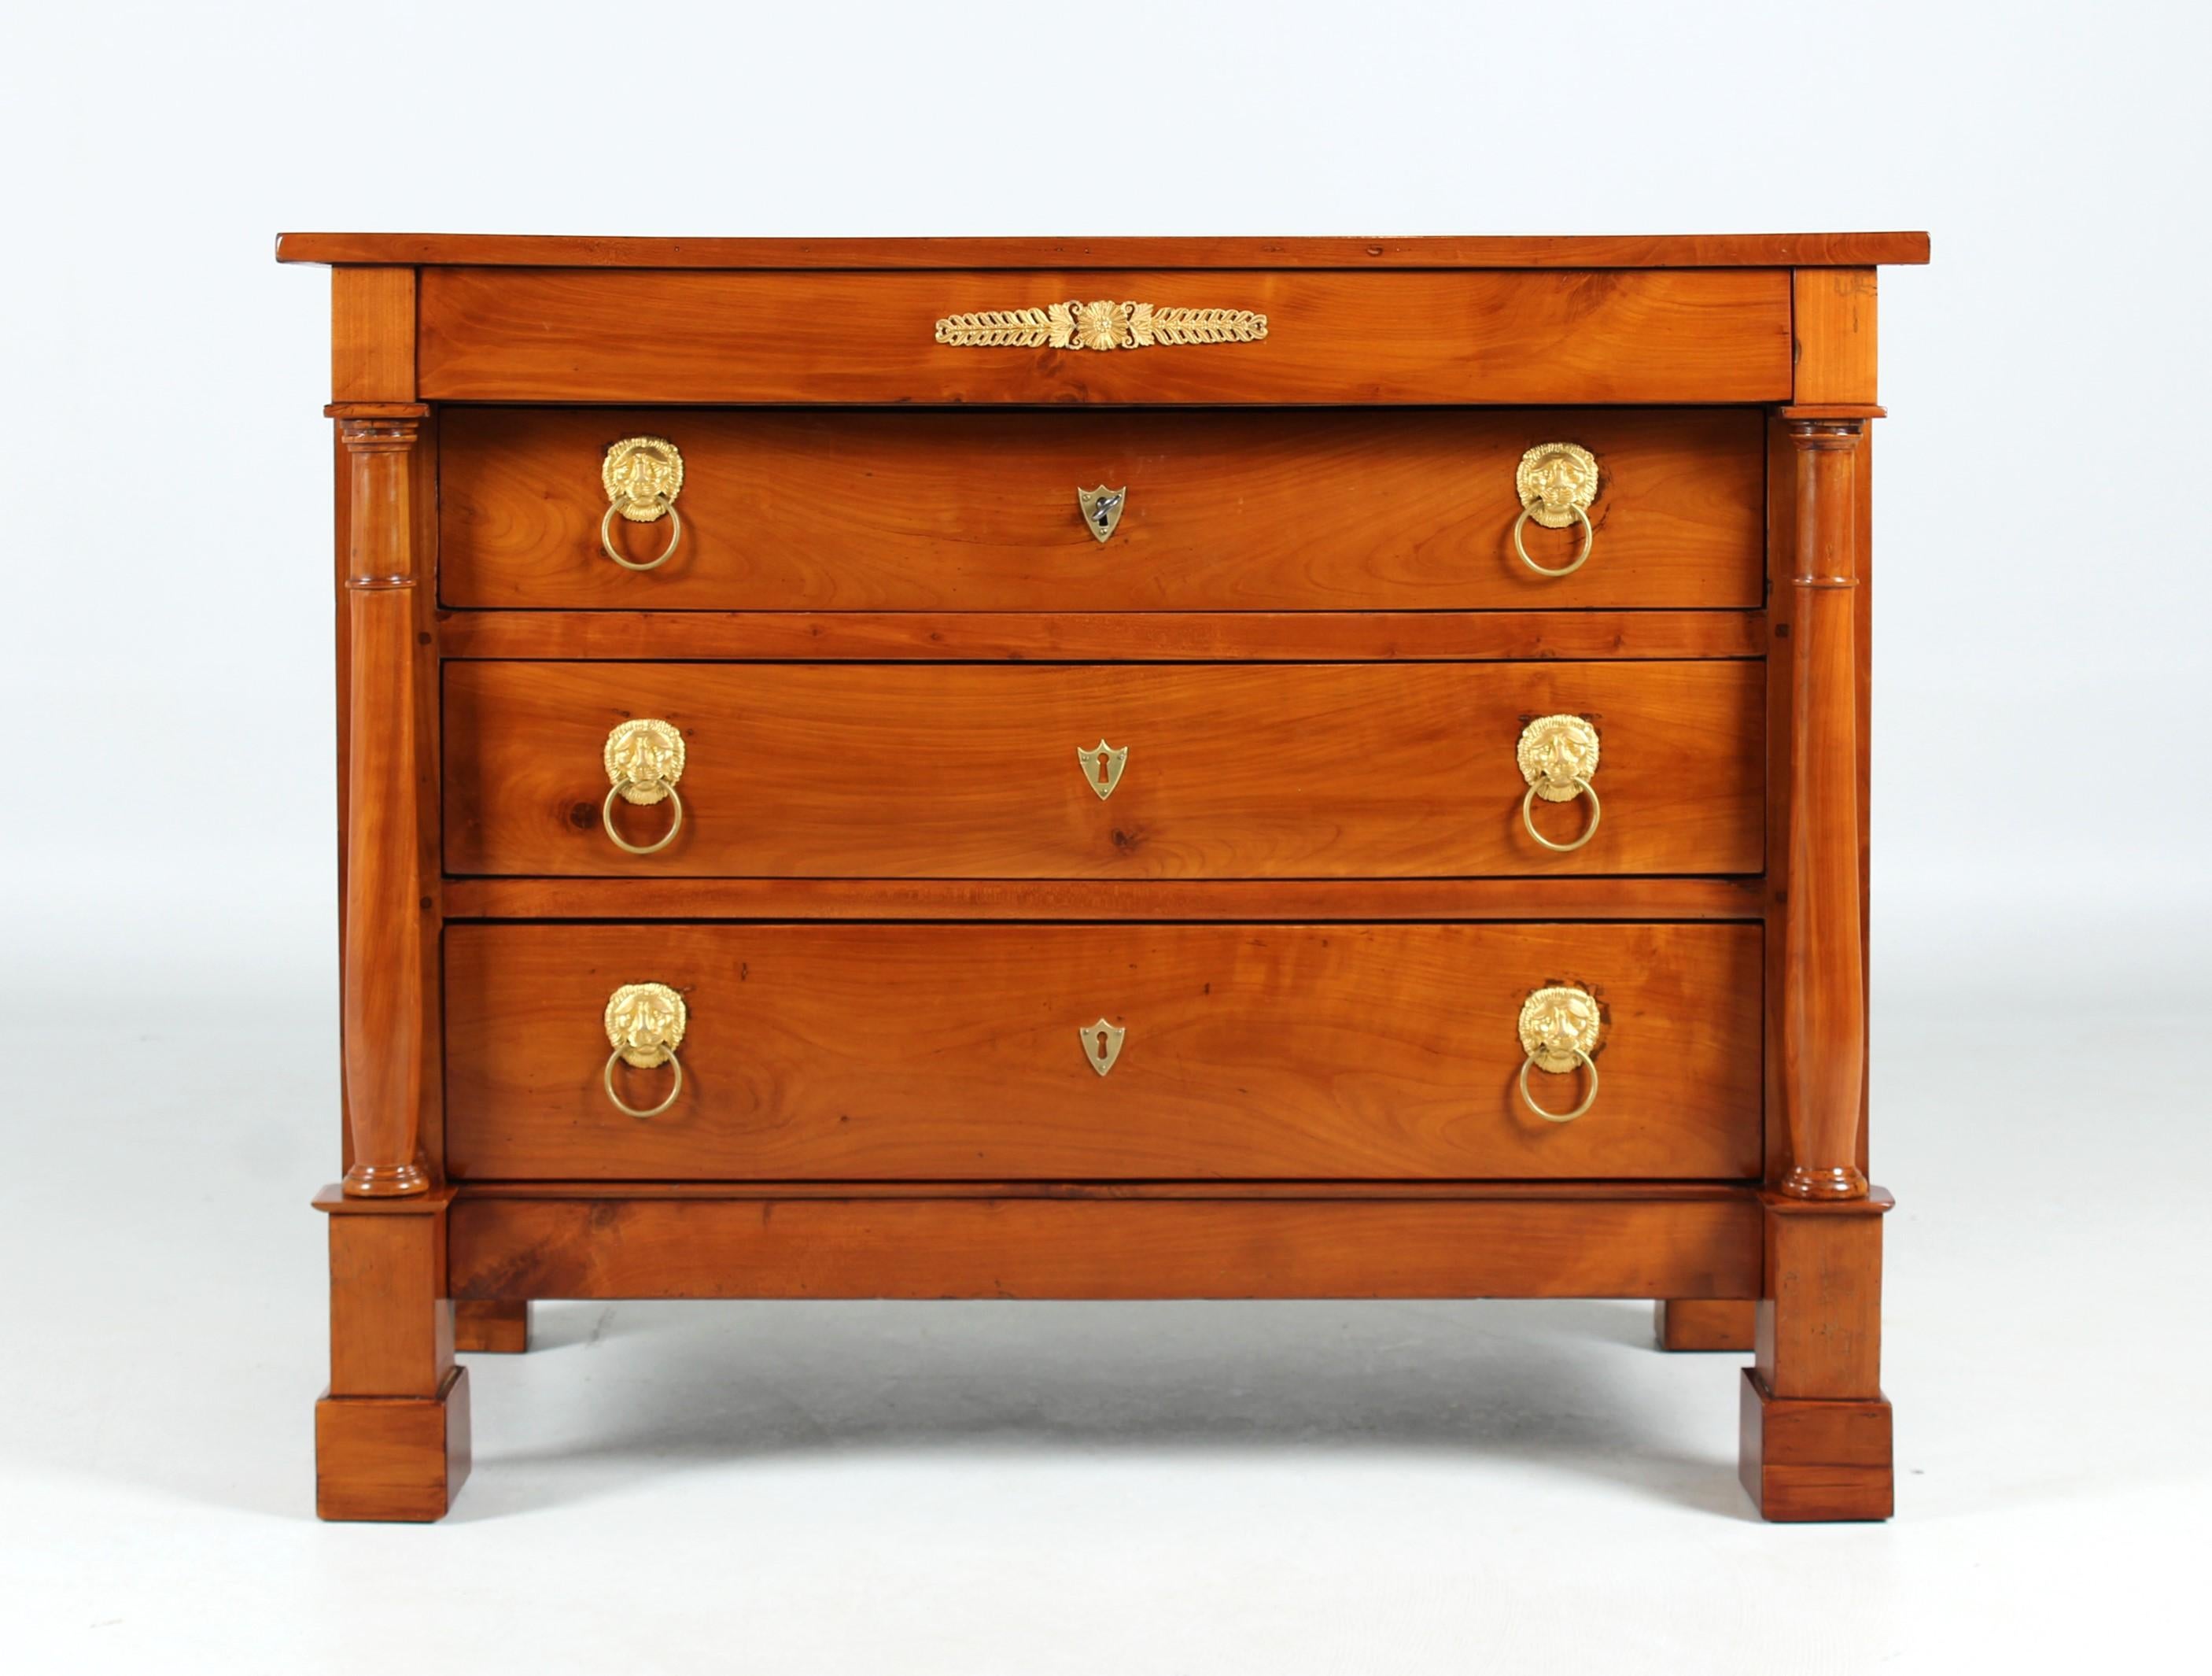 Antique cherry wood chest of drawers with columns

France
Cherry wood
around 1830

Dimensions: H x W x D: 88 x 112 x 56 cm

Description:
Antique French chest of drawers with pleasing dimensions and balanced proportions.

A four-tier piece of